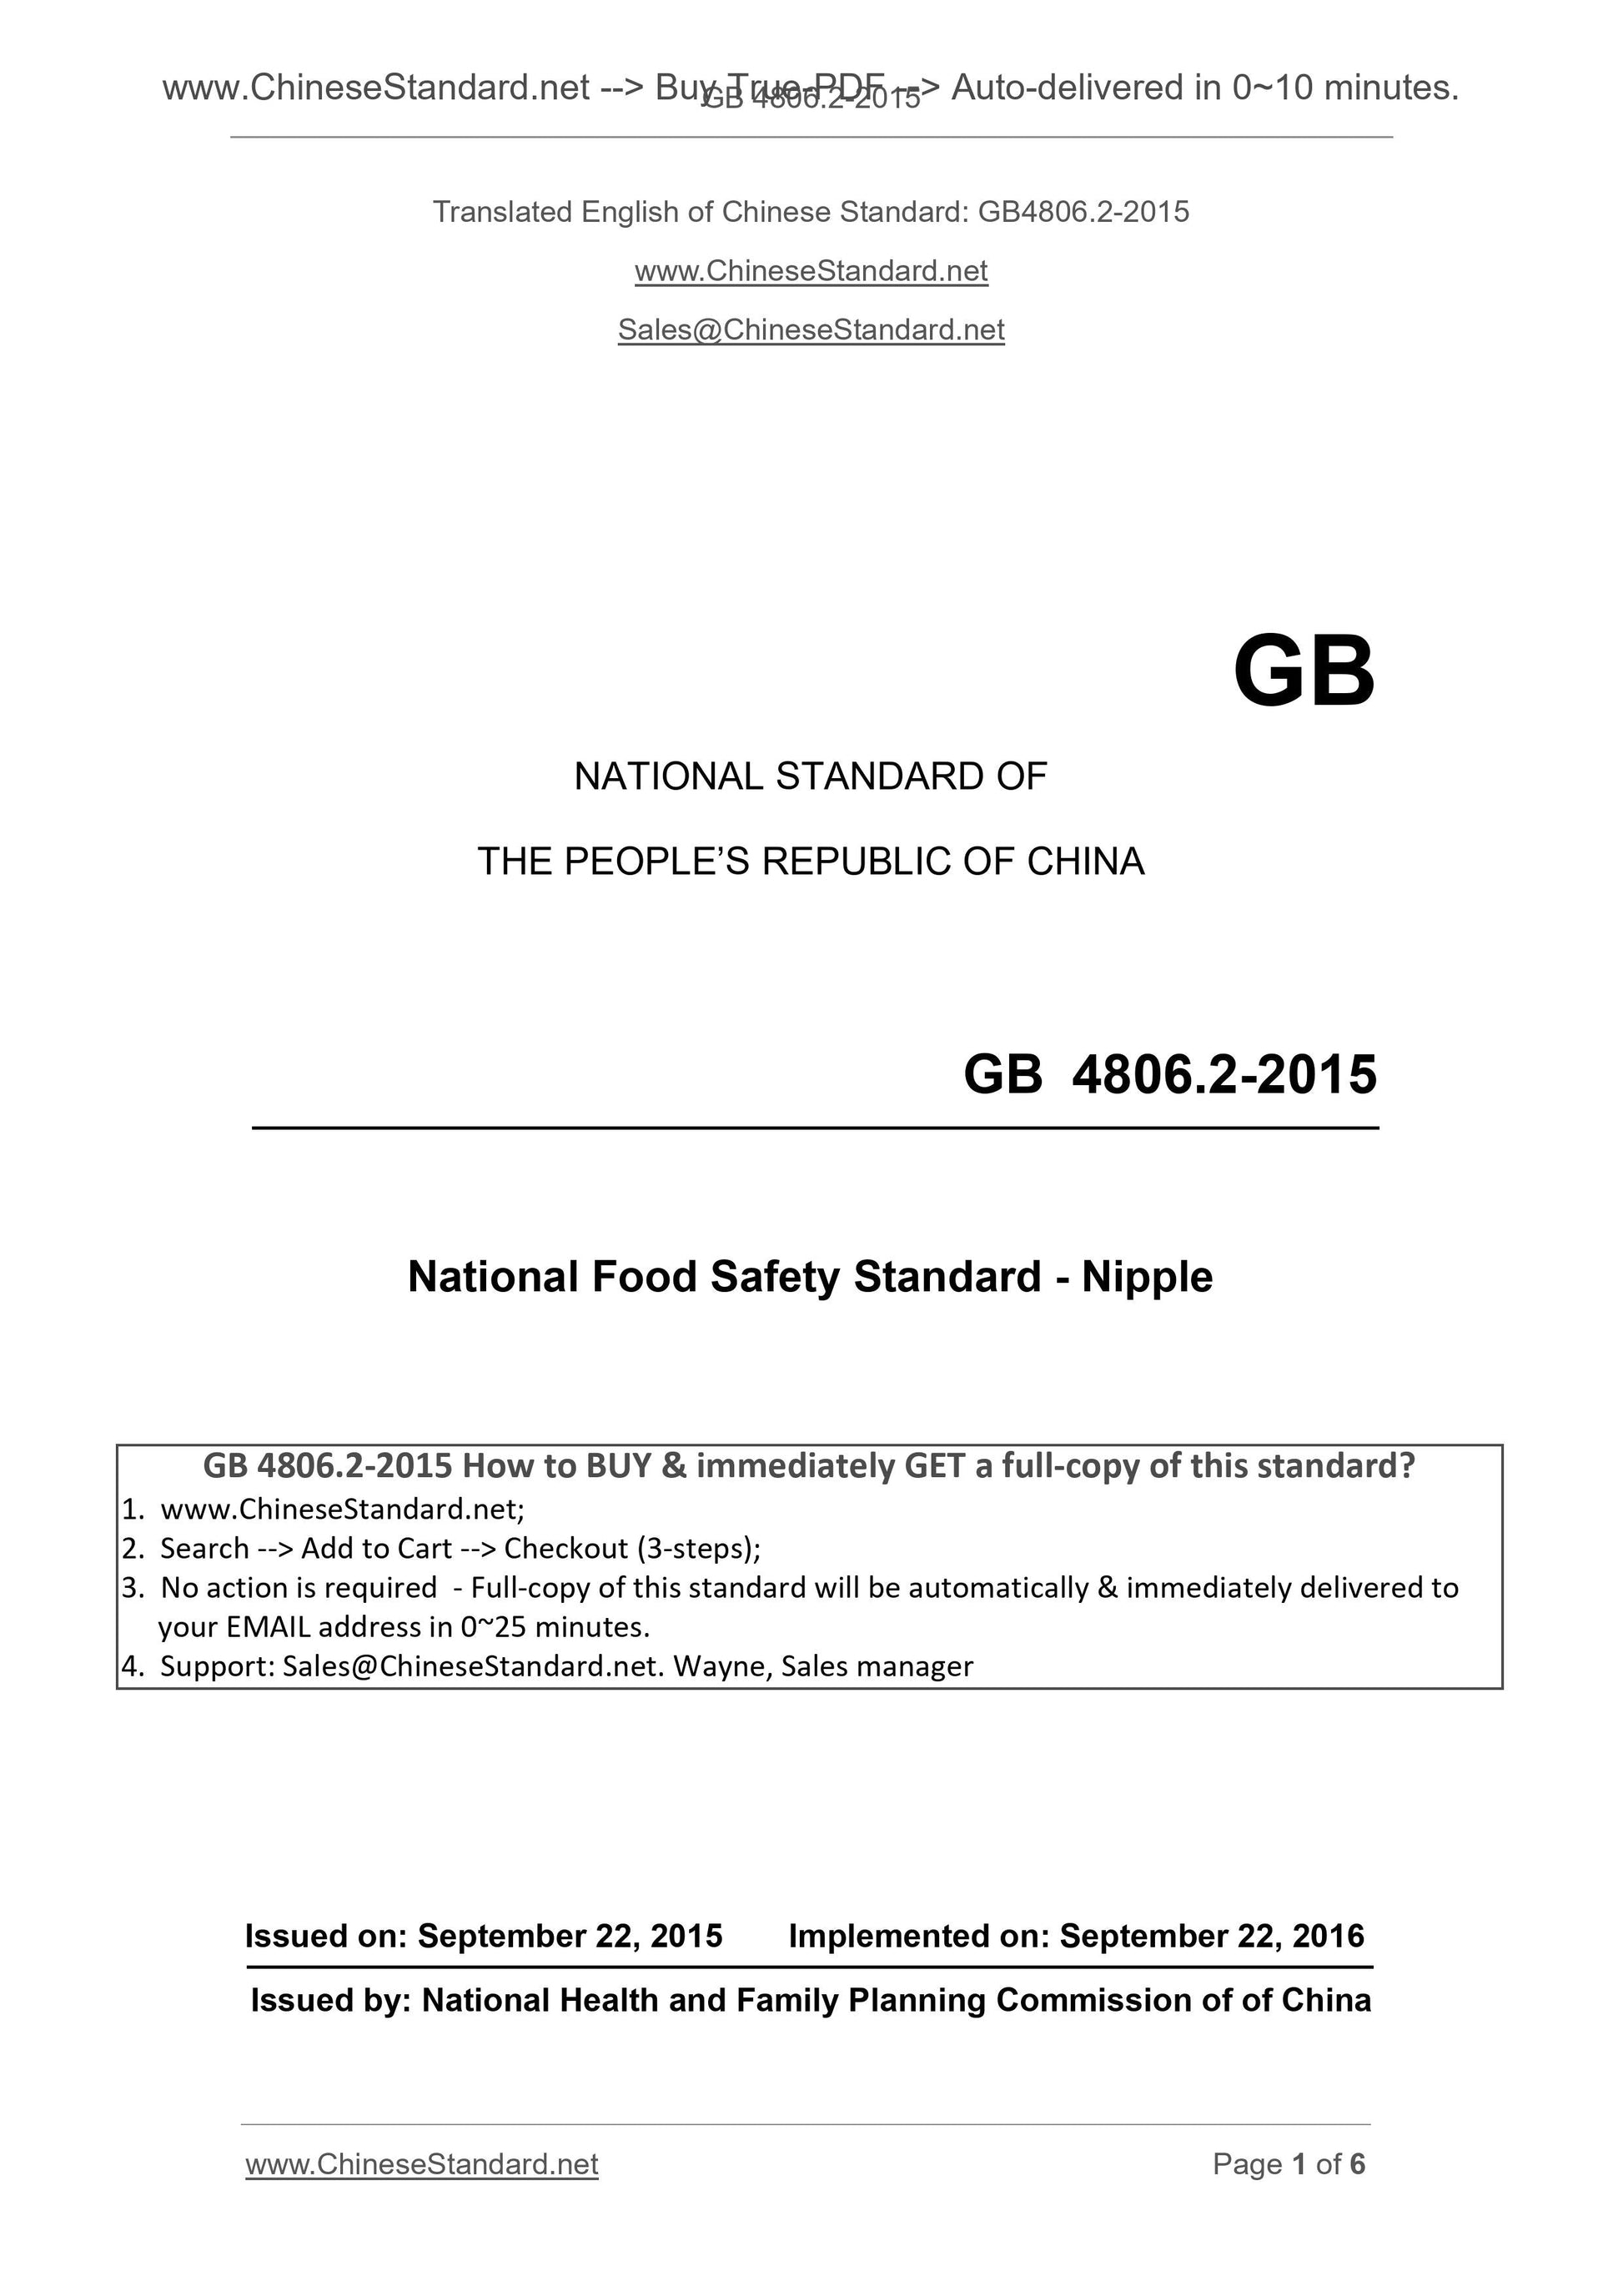 GB 4806.2-2015 Page 1